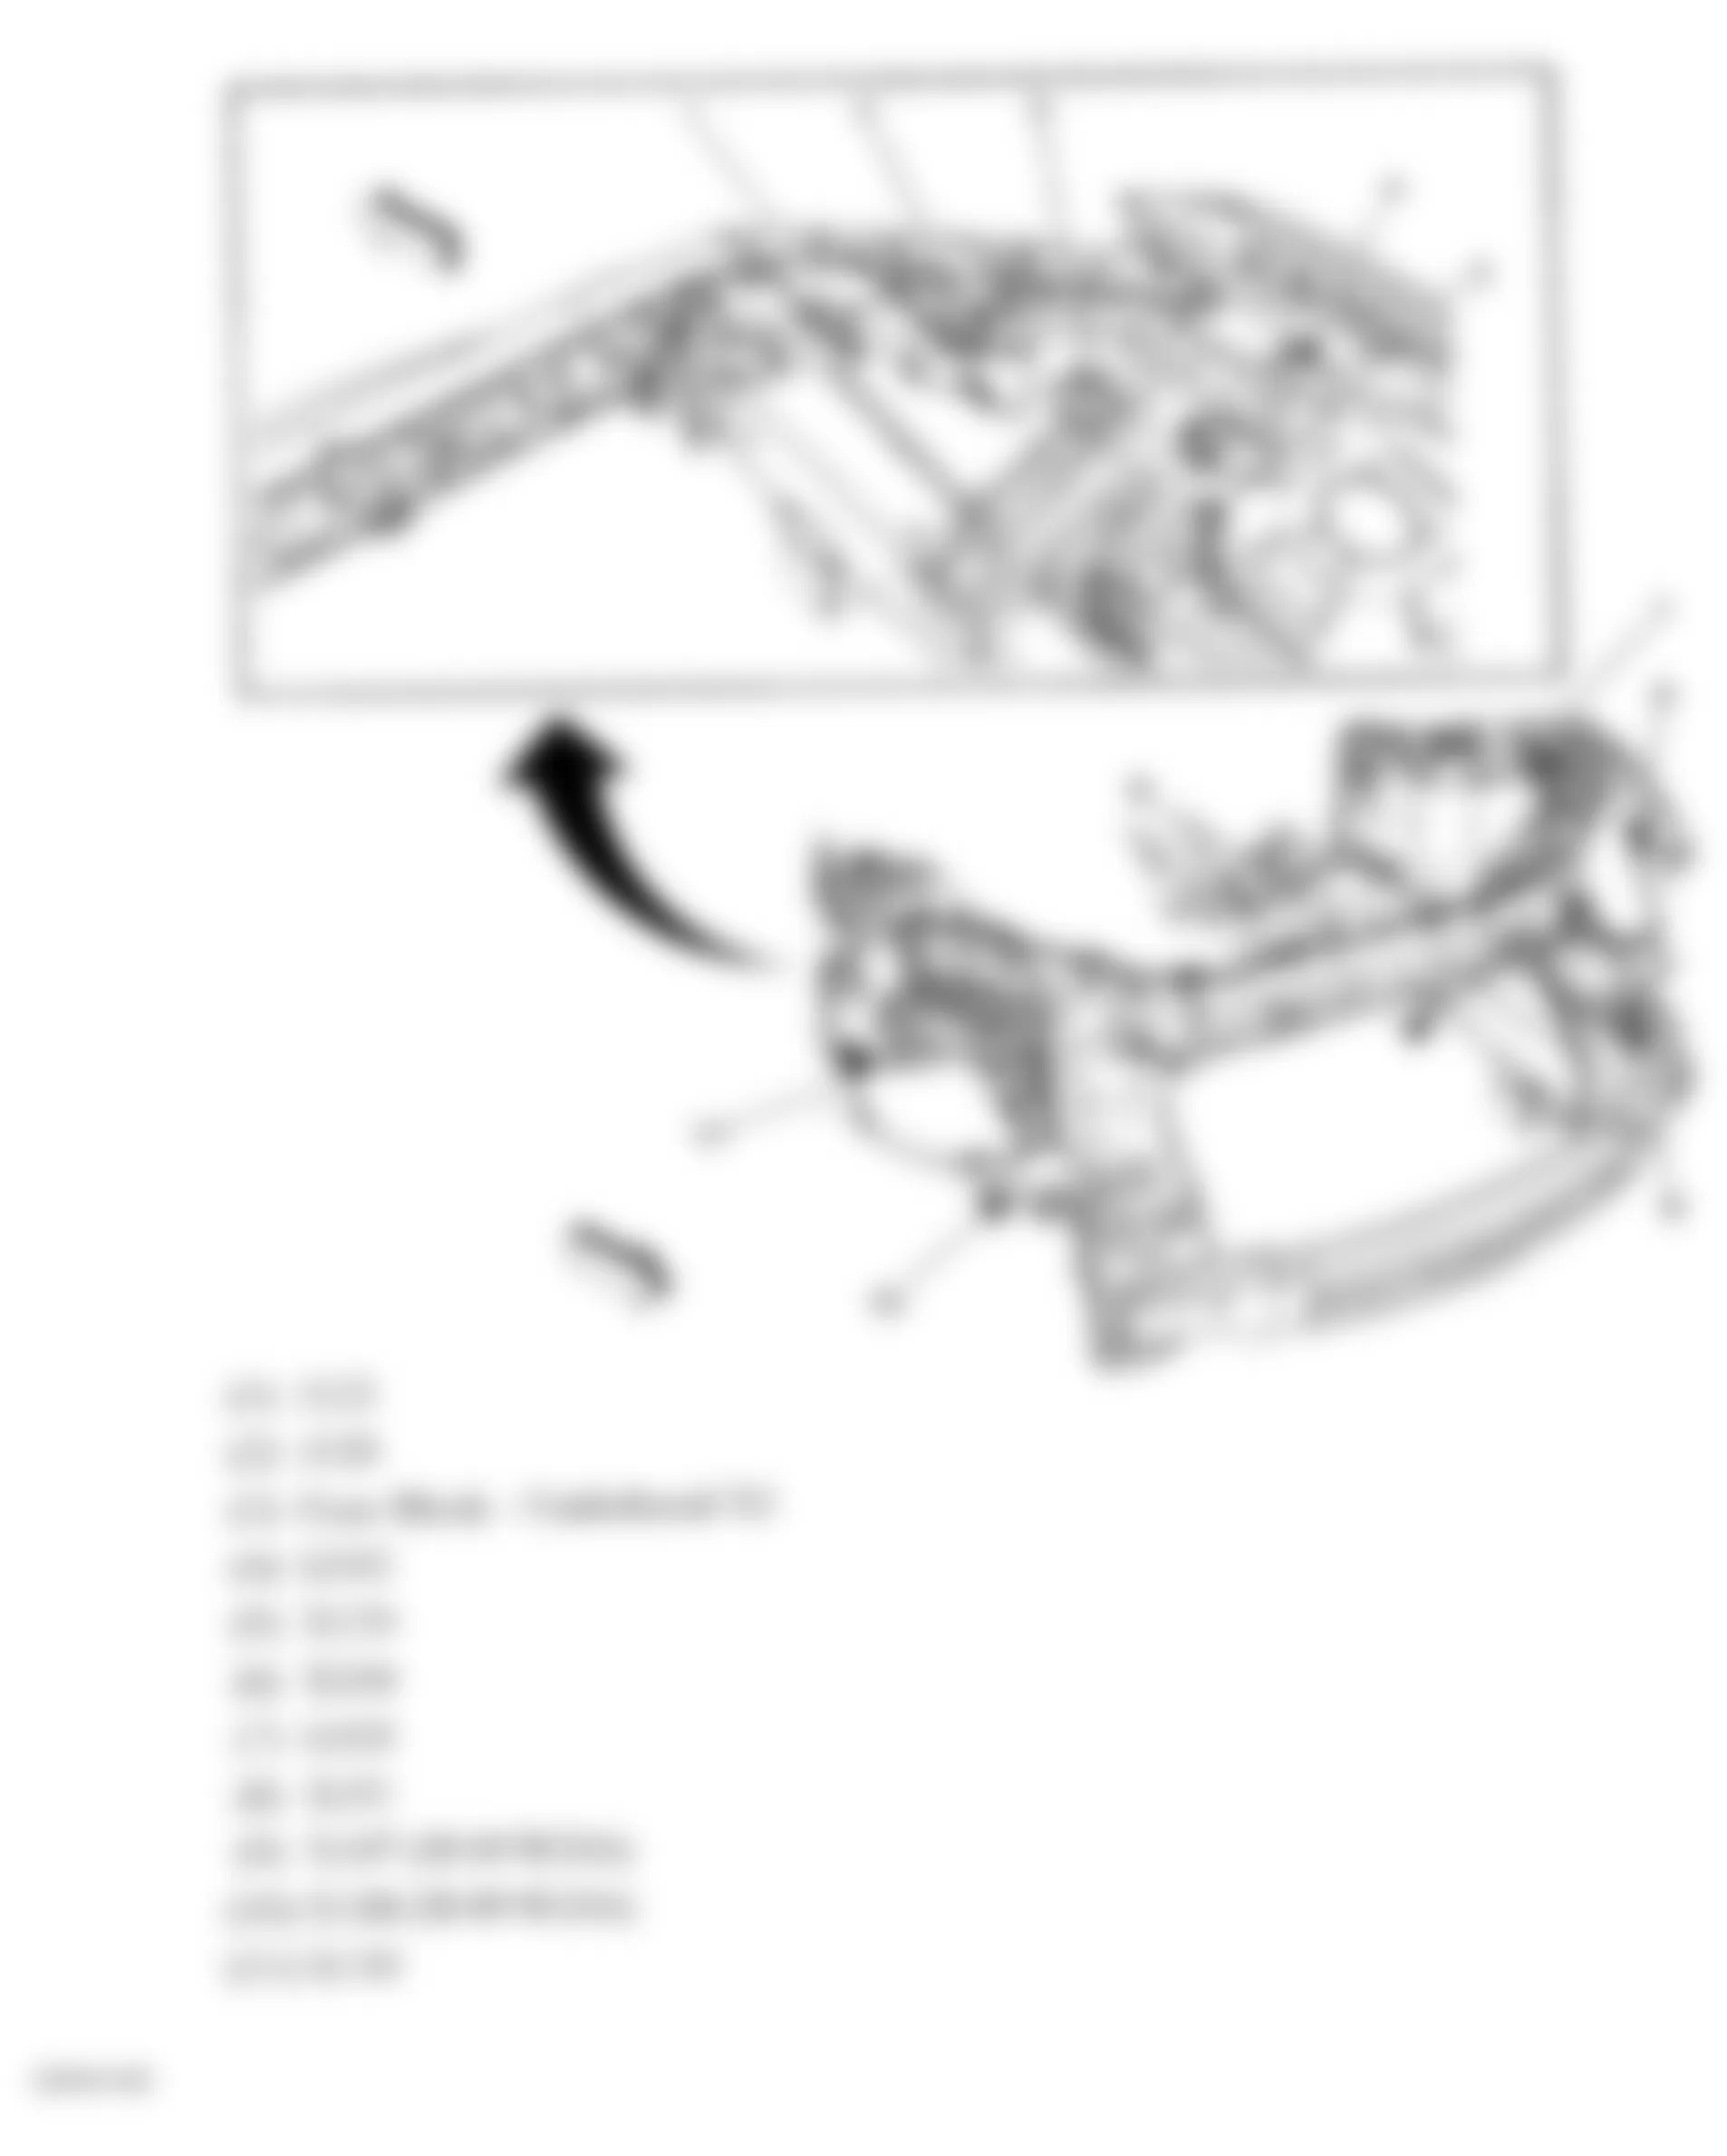 GMC Acadia SLE 2008 - Component Locations -  Engine Compartment